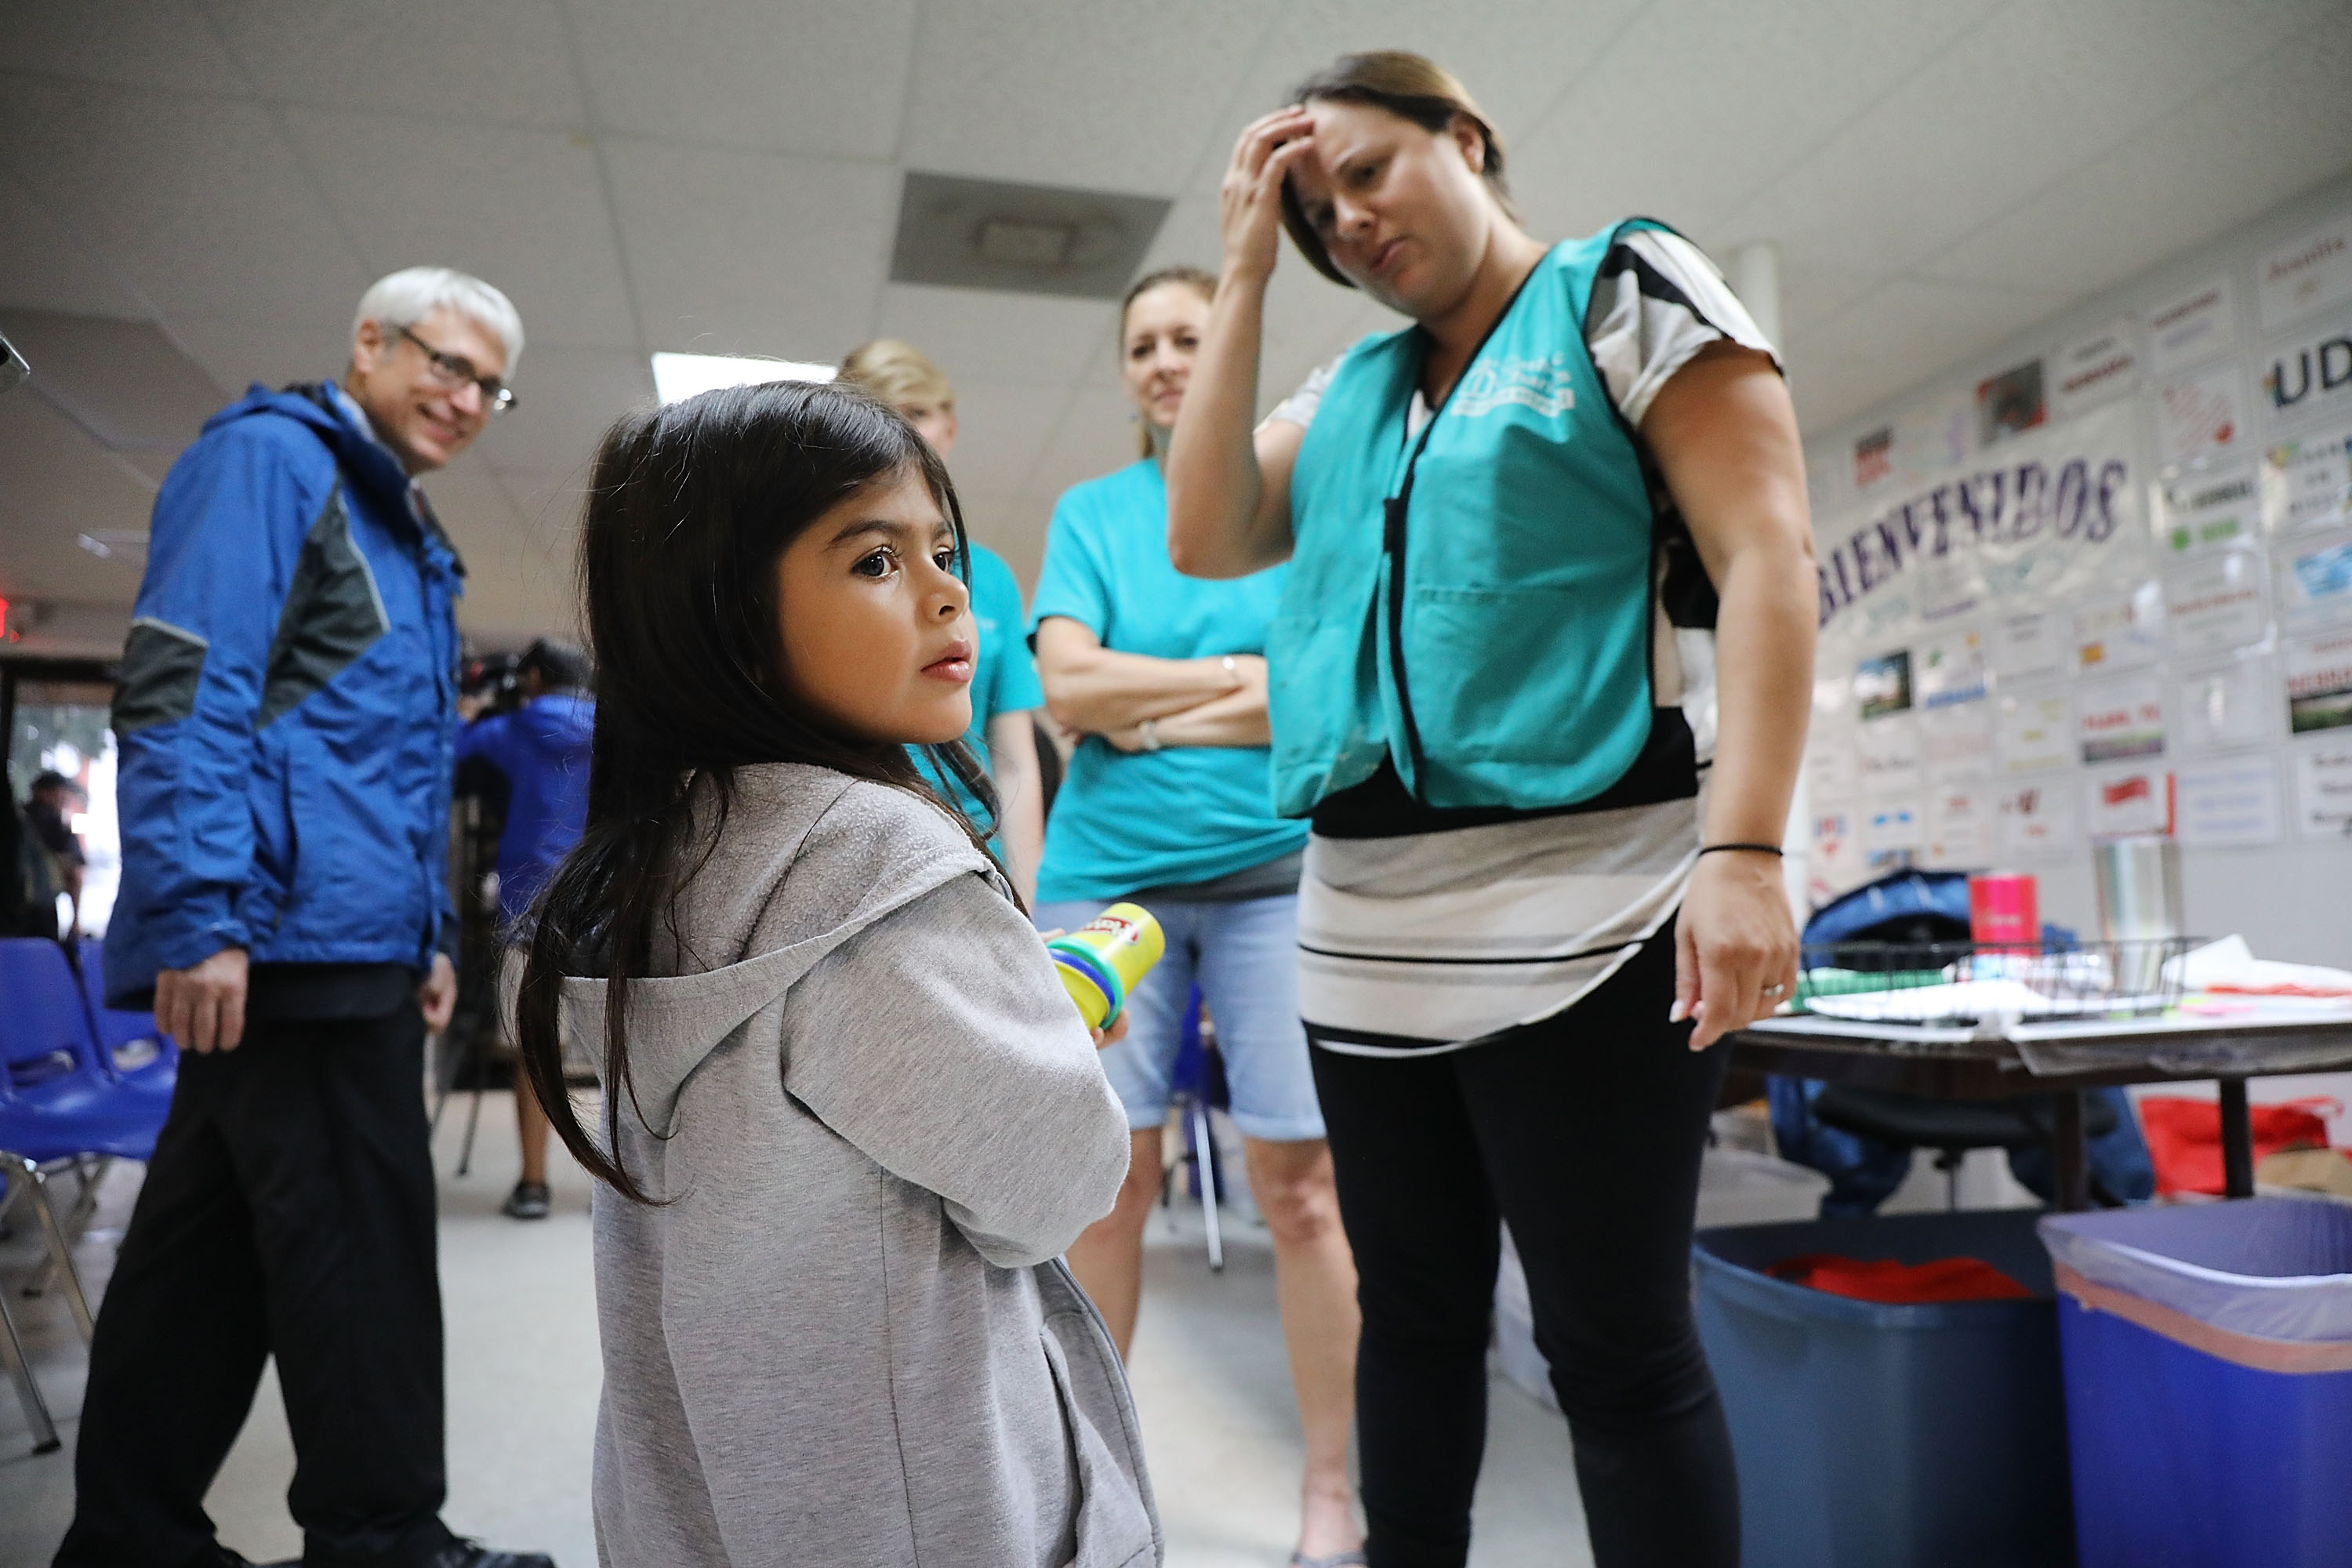 Jenquel, who crossed the U.S., Mexico border with her mother and siblings, speaks with volunteers at the Catholic Charities Humanitarian Respite Center in McAllen, Texas.(Spencer Platt/Getty Images)